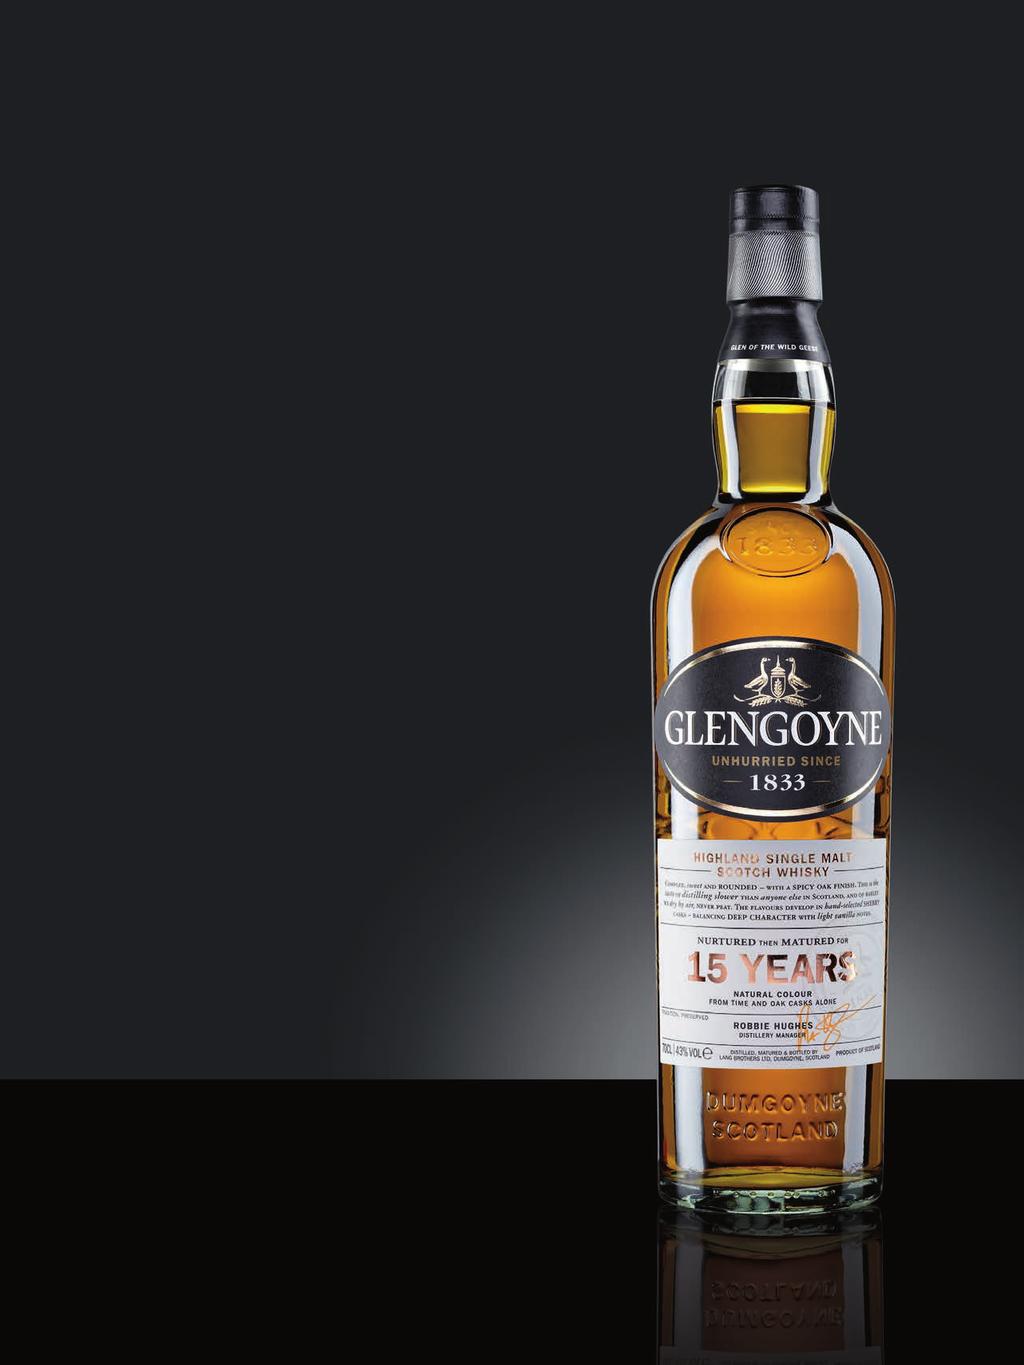 RARE, EXPENSIVE, HANDMADE. AND THAT S JUST THE CASKS. THAT S THE GLENGOYNE WAY. glengoyne.